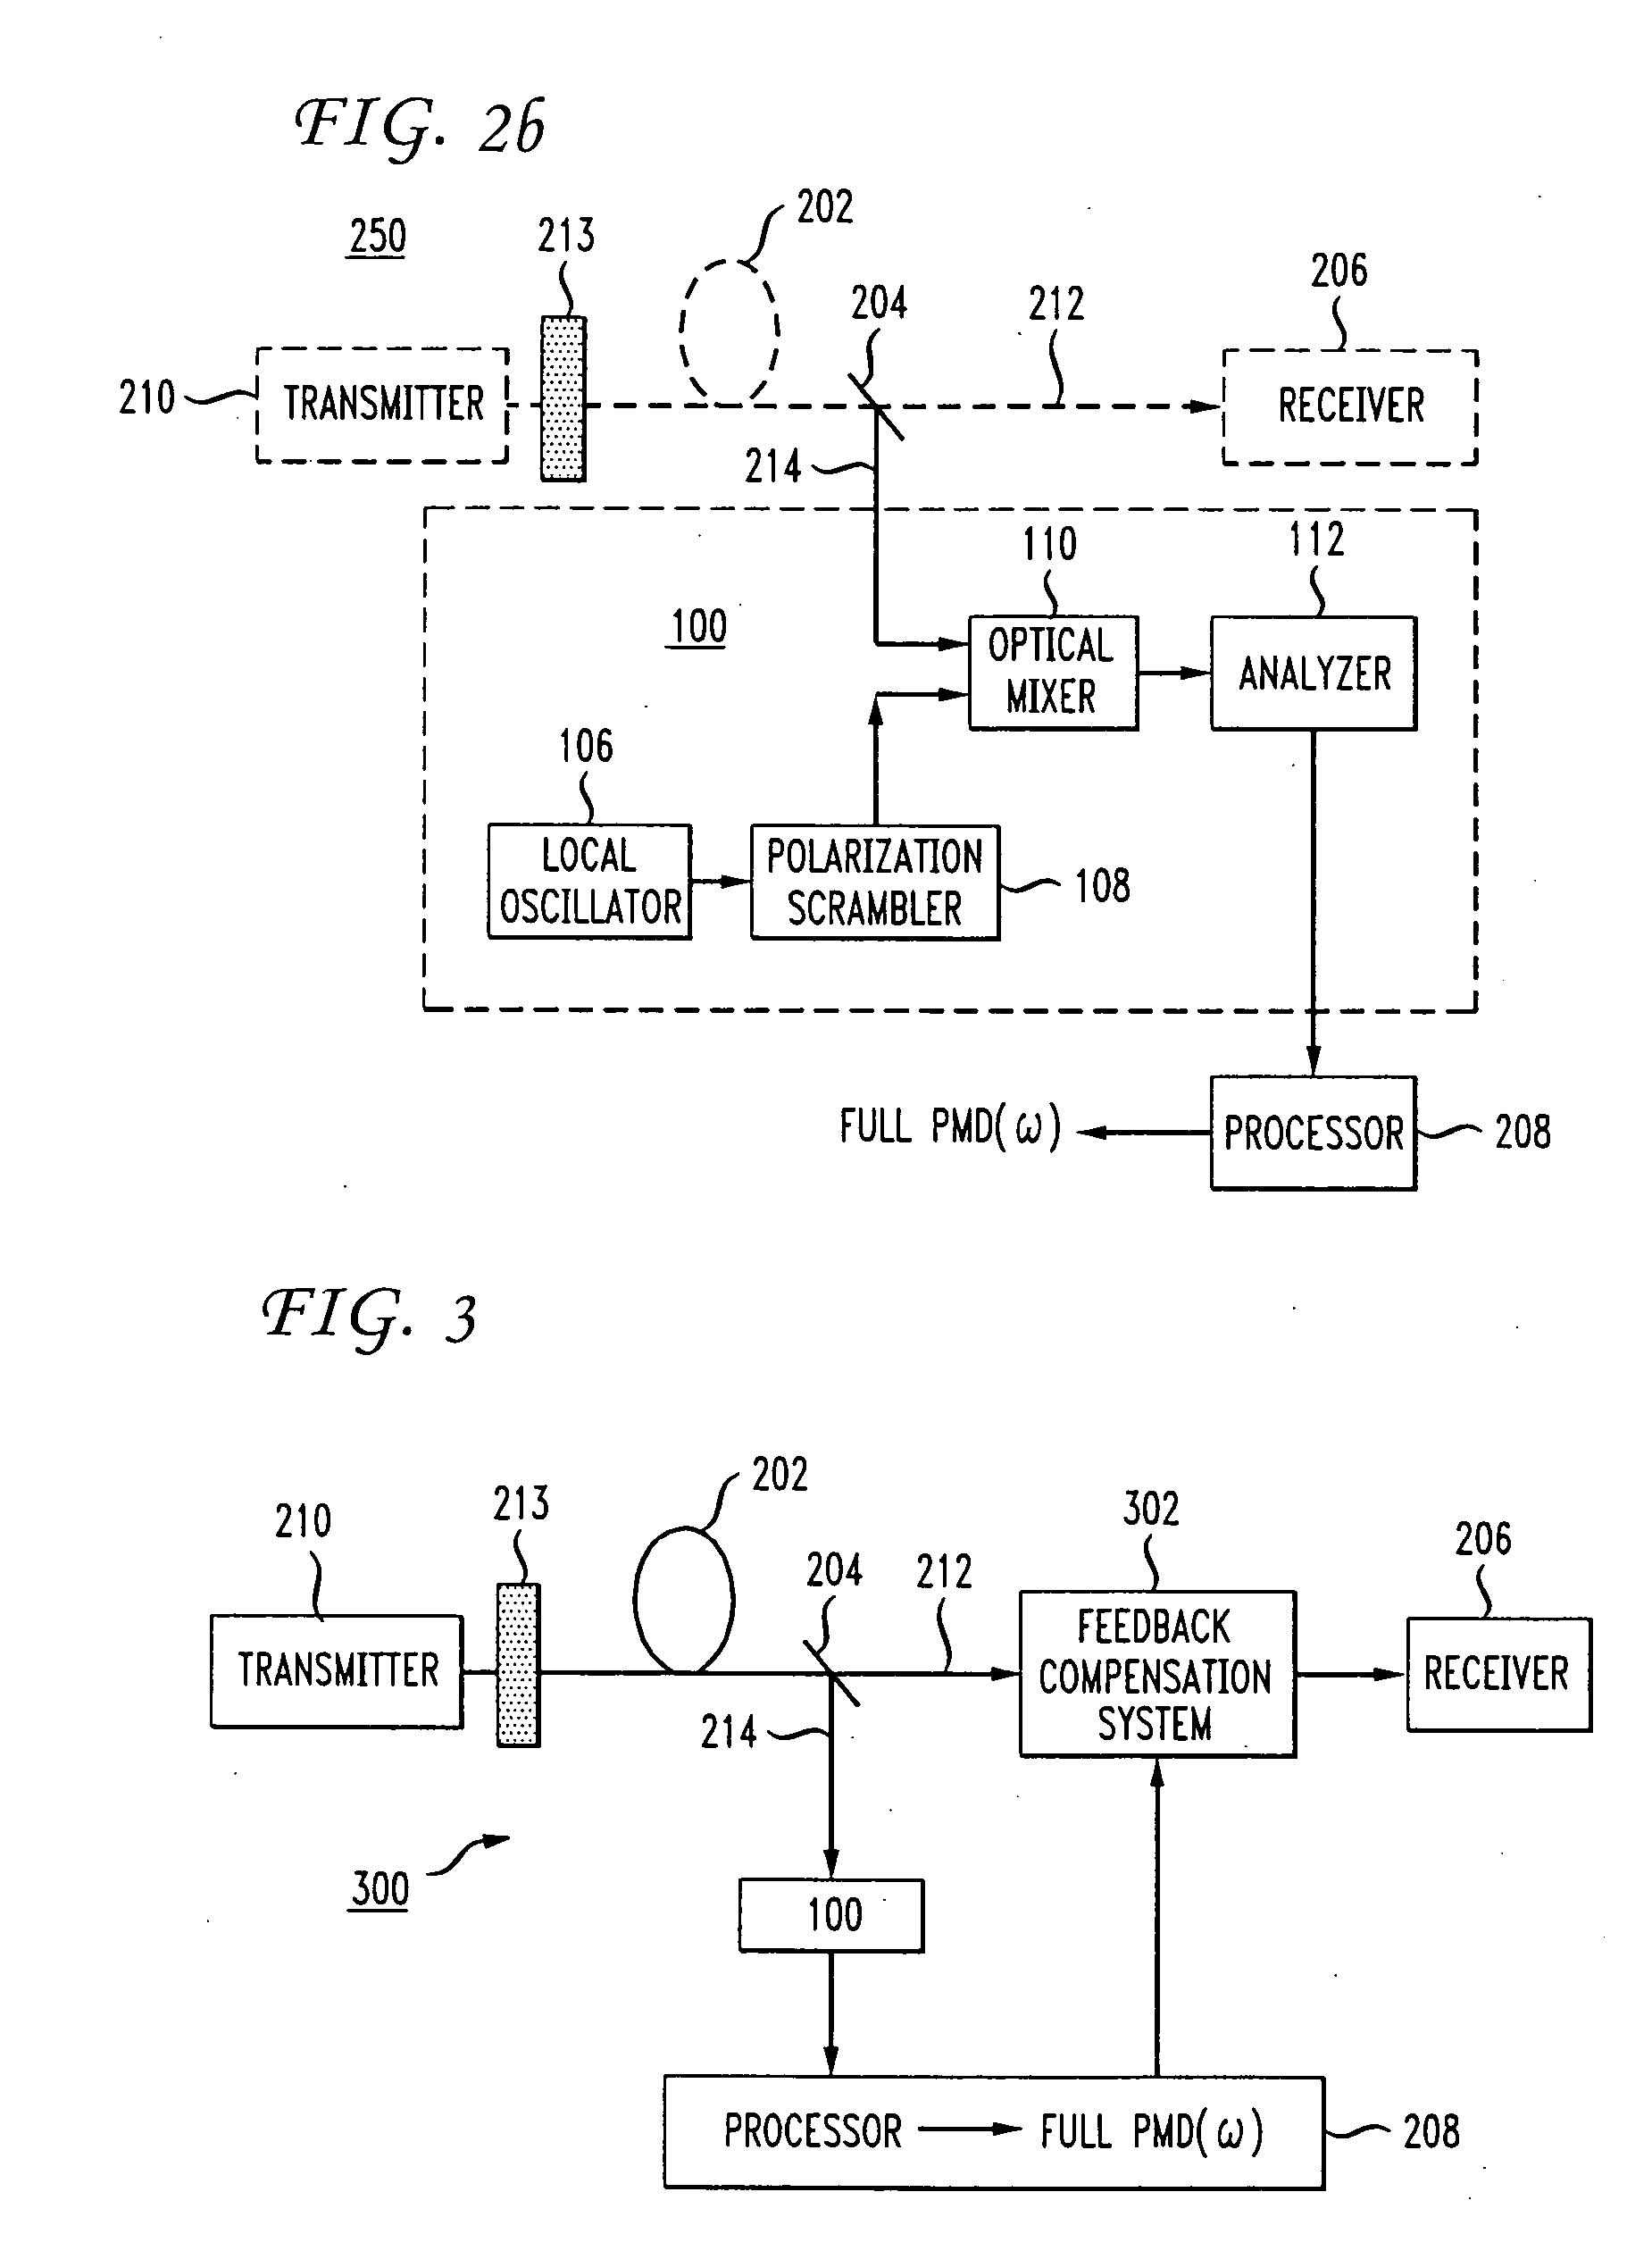 Method and apparatus for measuring frequency-resolved states of polarization of a working optical channel using polarization-scrambled heterodyning